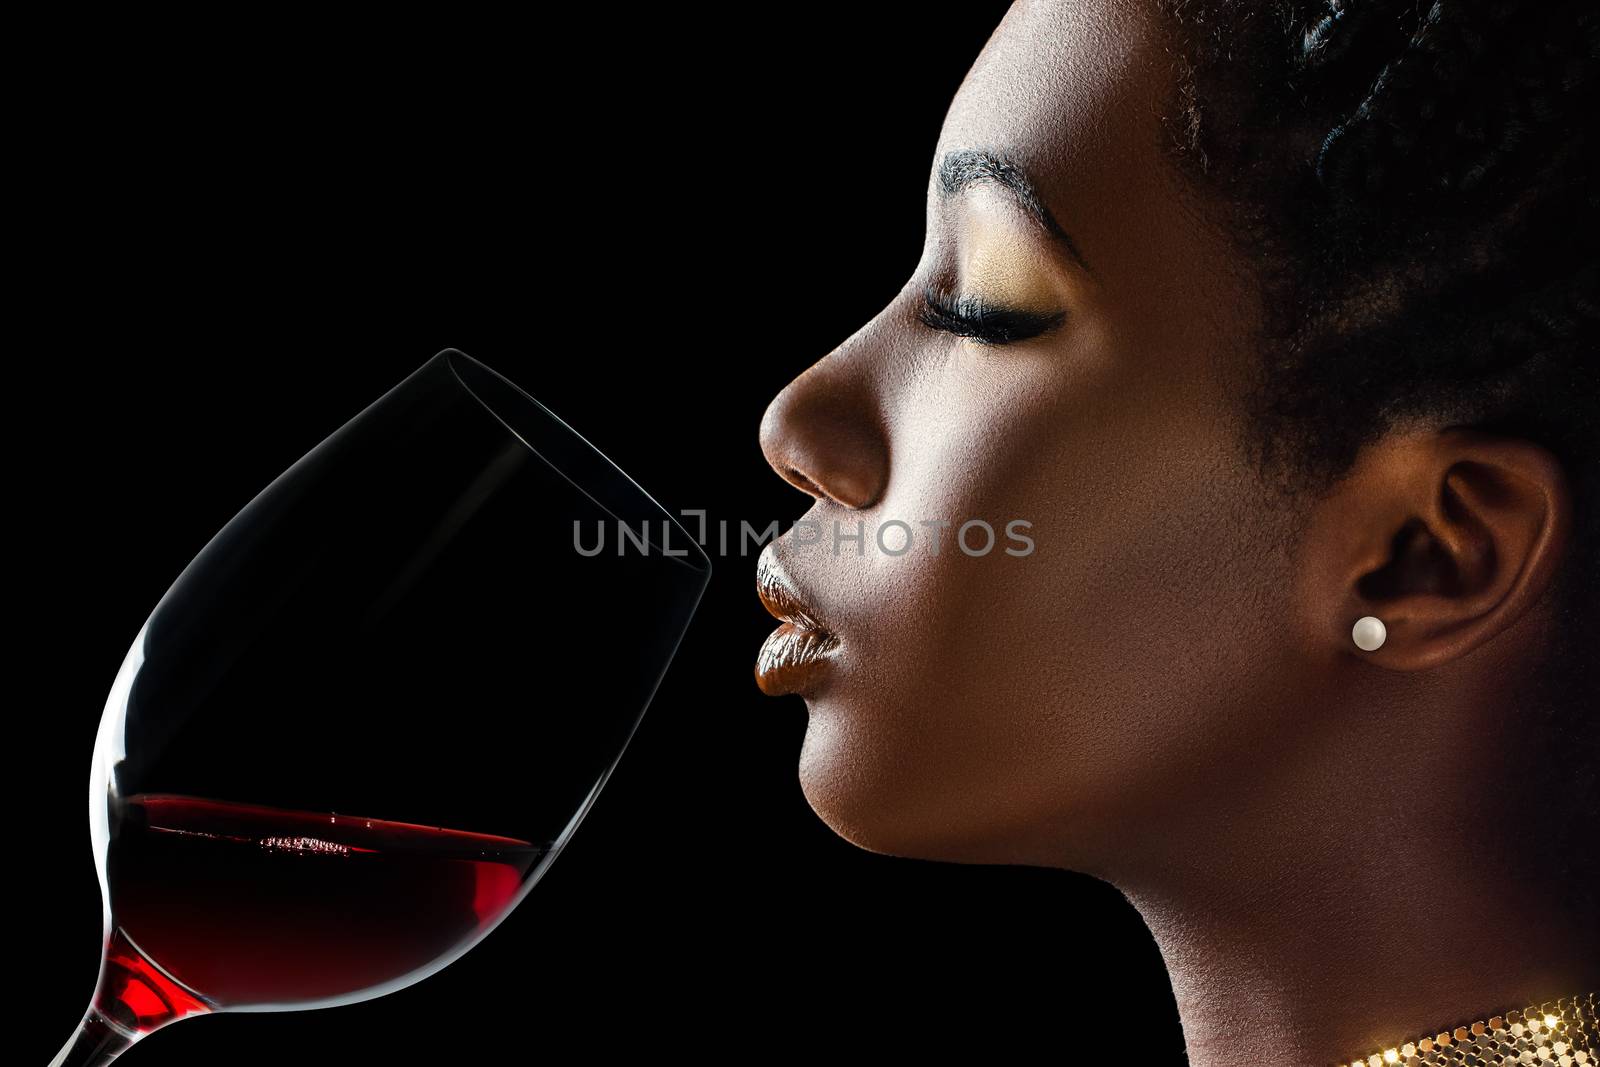 Macro close up low key portrait of sensual african woman smelling red wine.Side view of girl with red wine glass next to face against black background.